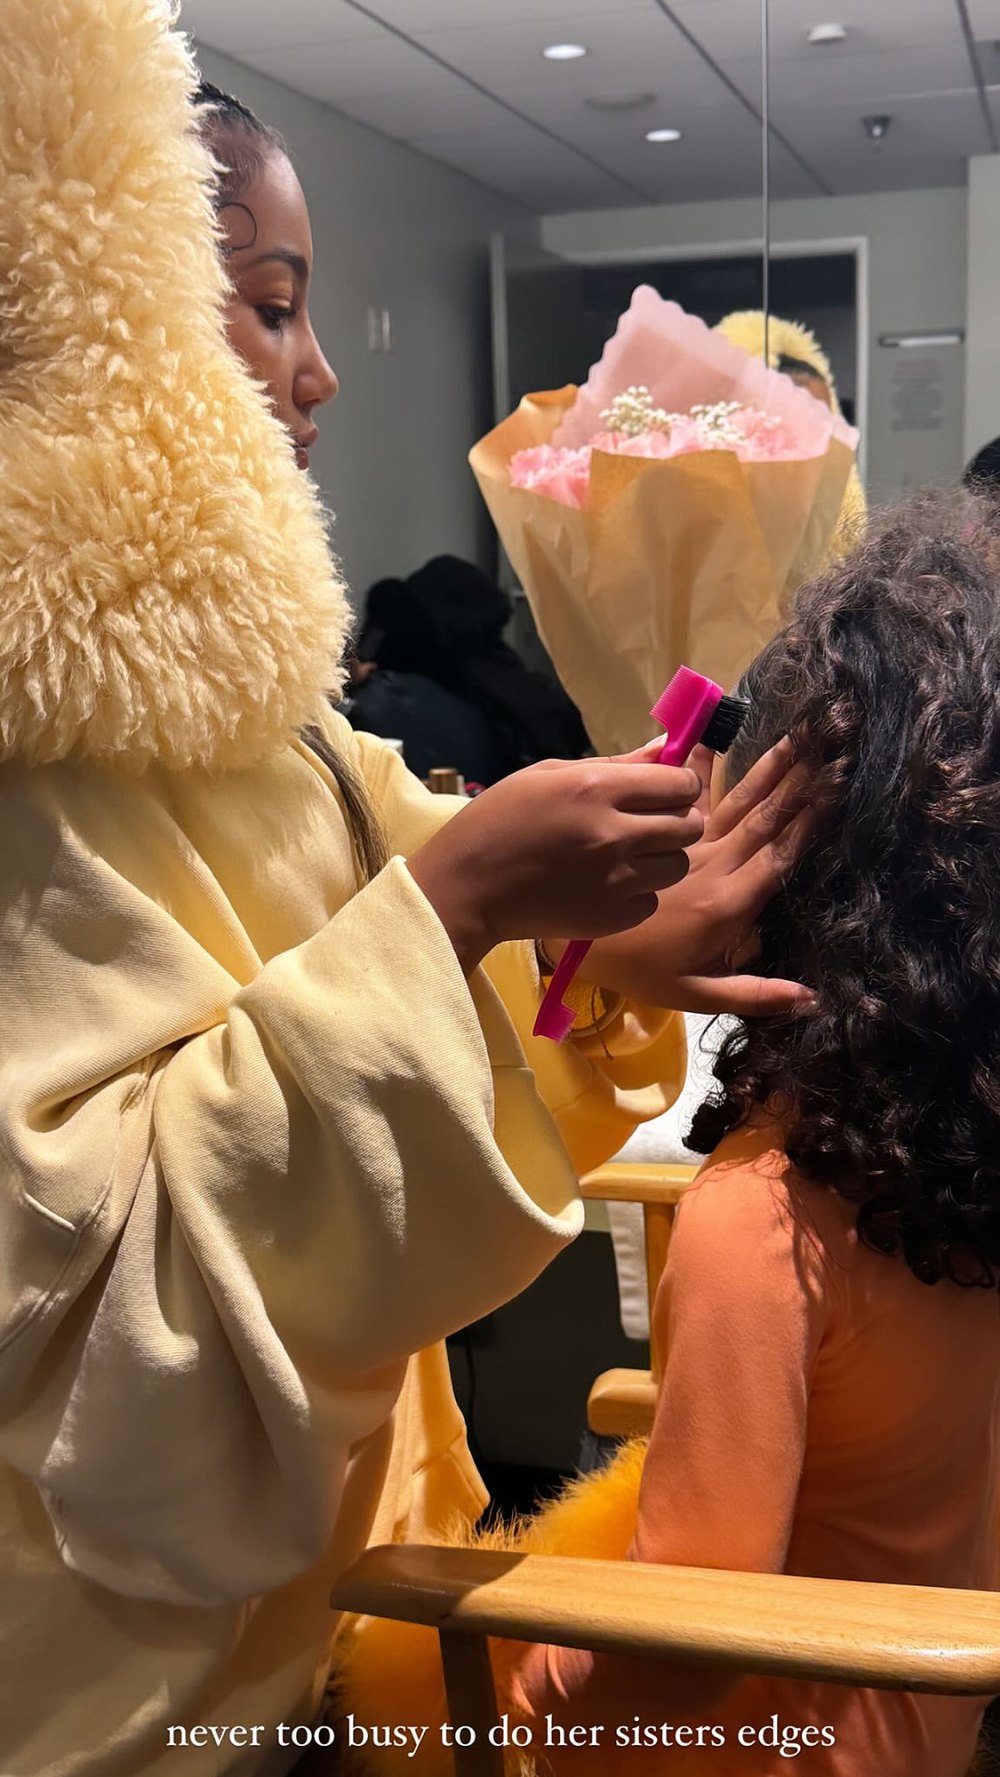 North West Kardashian Does Sister Chicago's Edges in Between 'Lion King' Concert